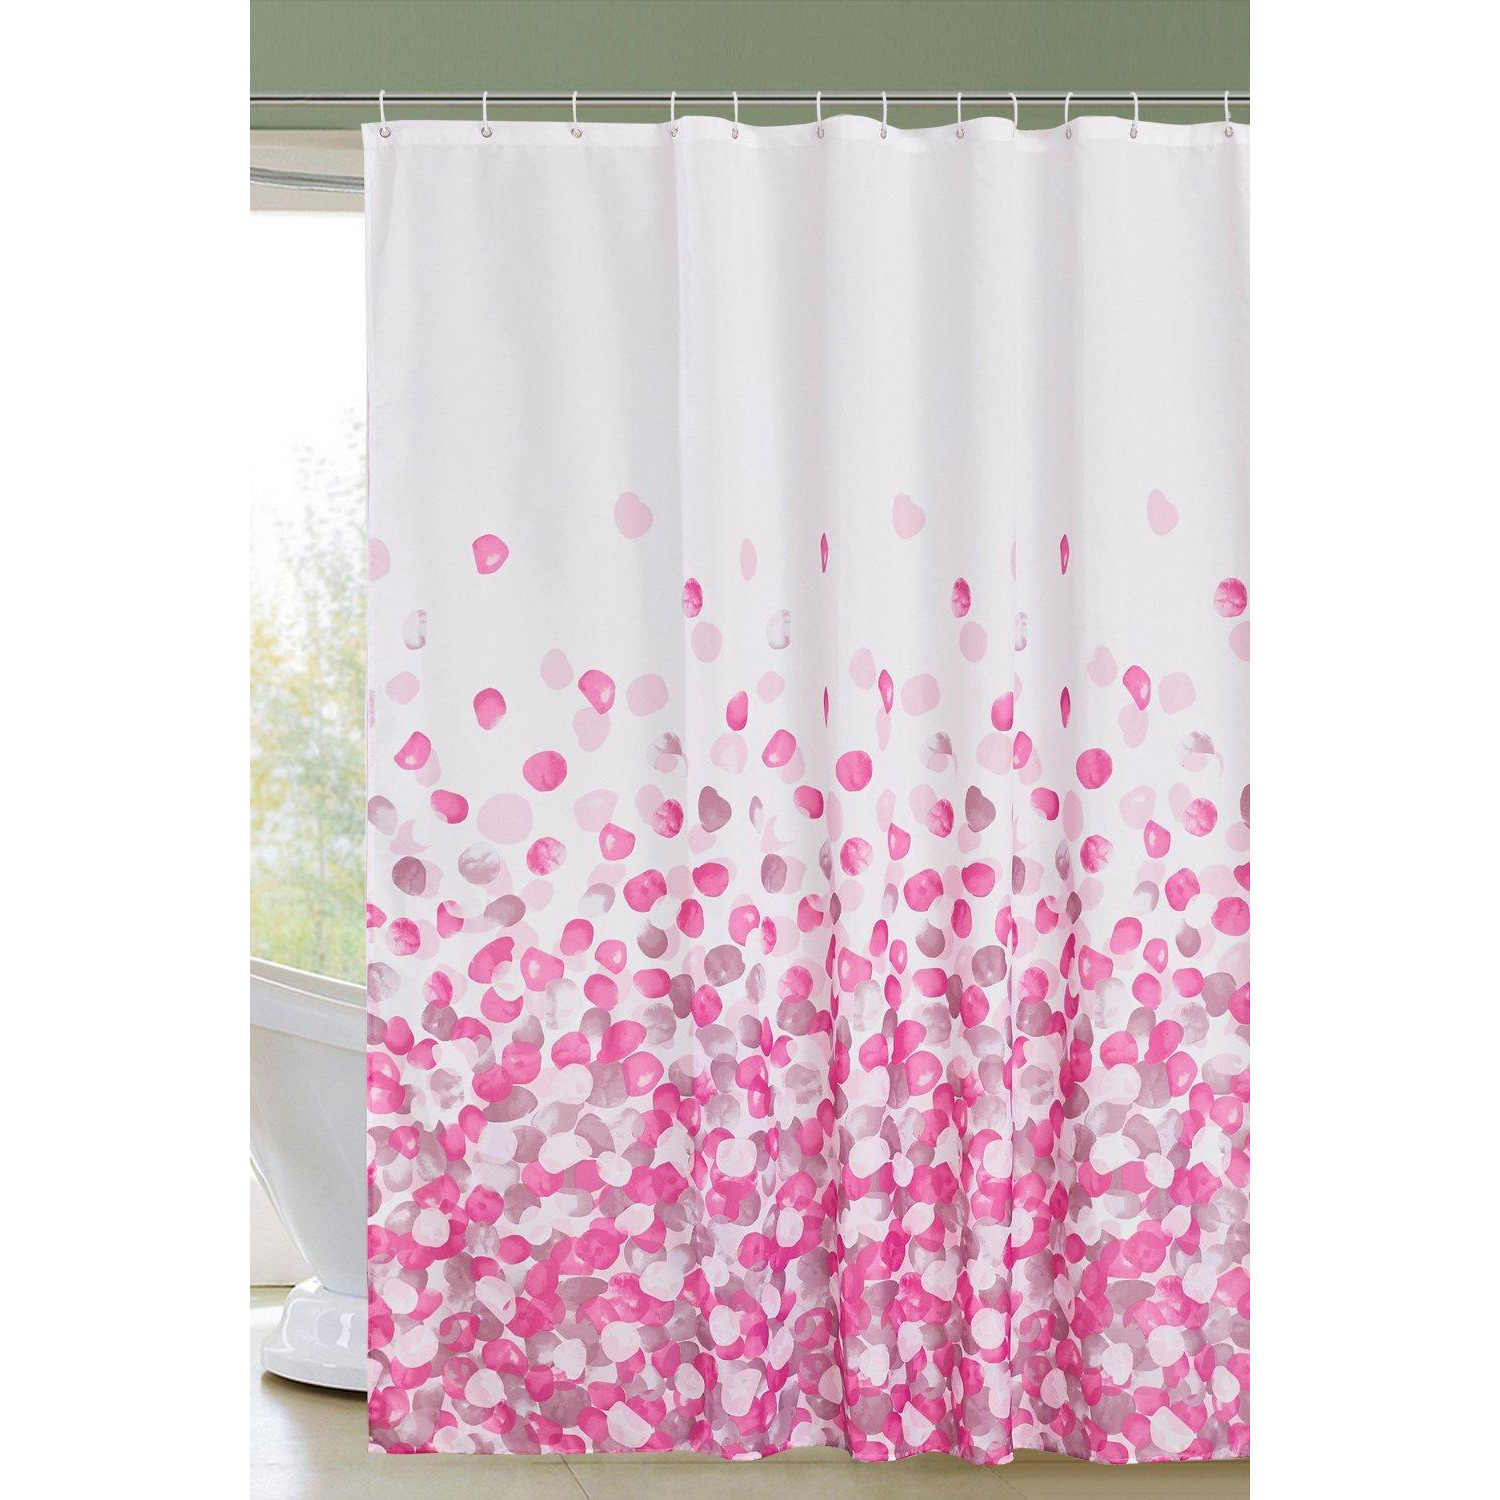 Pink Pebble Printed Polyester Shower Curtain - 180cm x 200cm - image 1